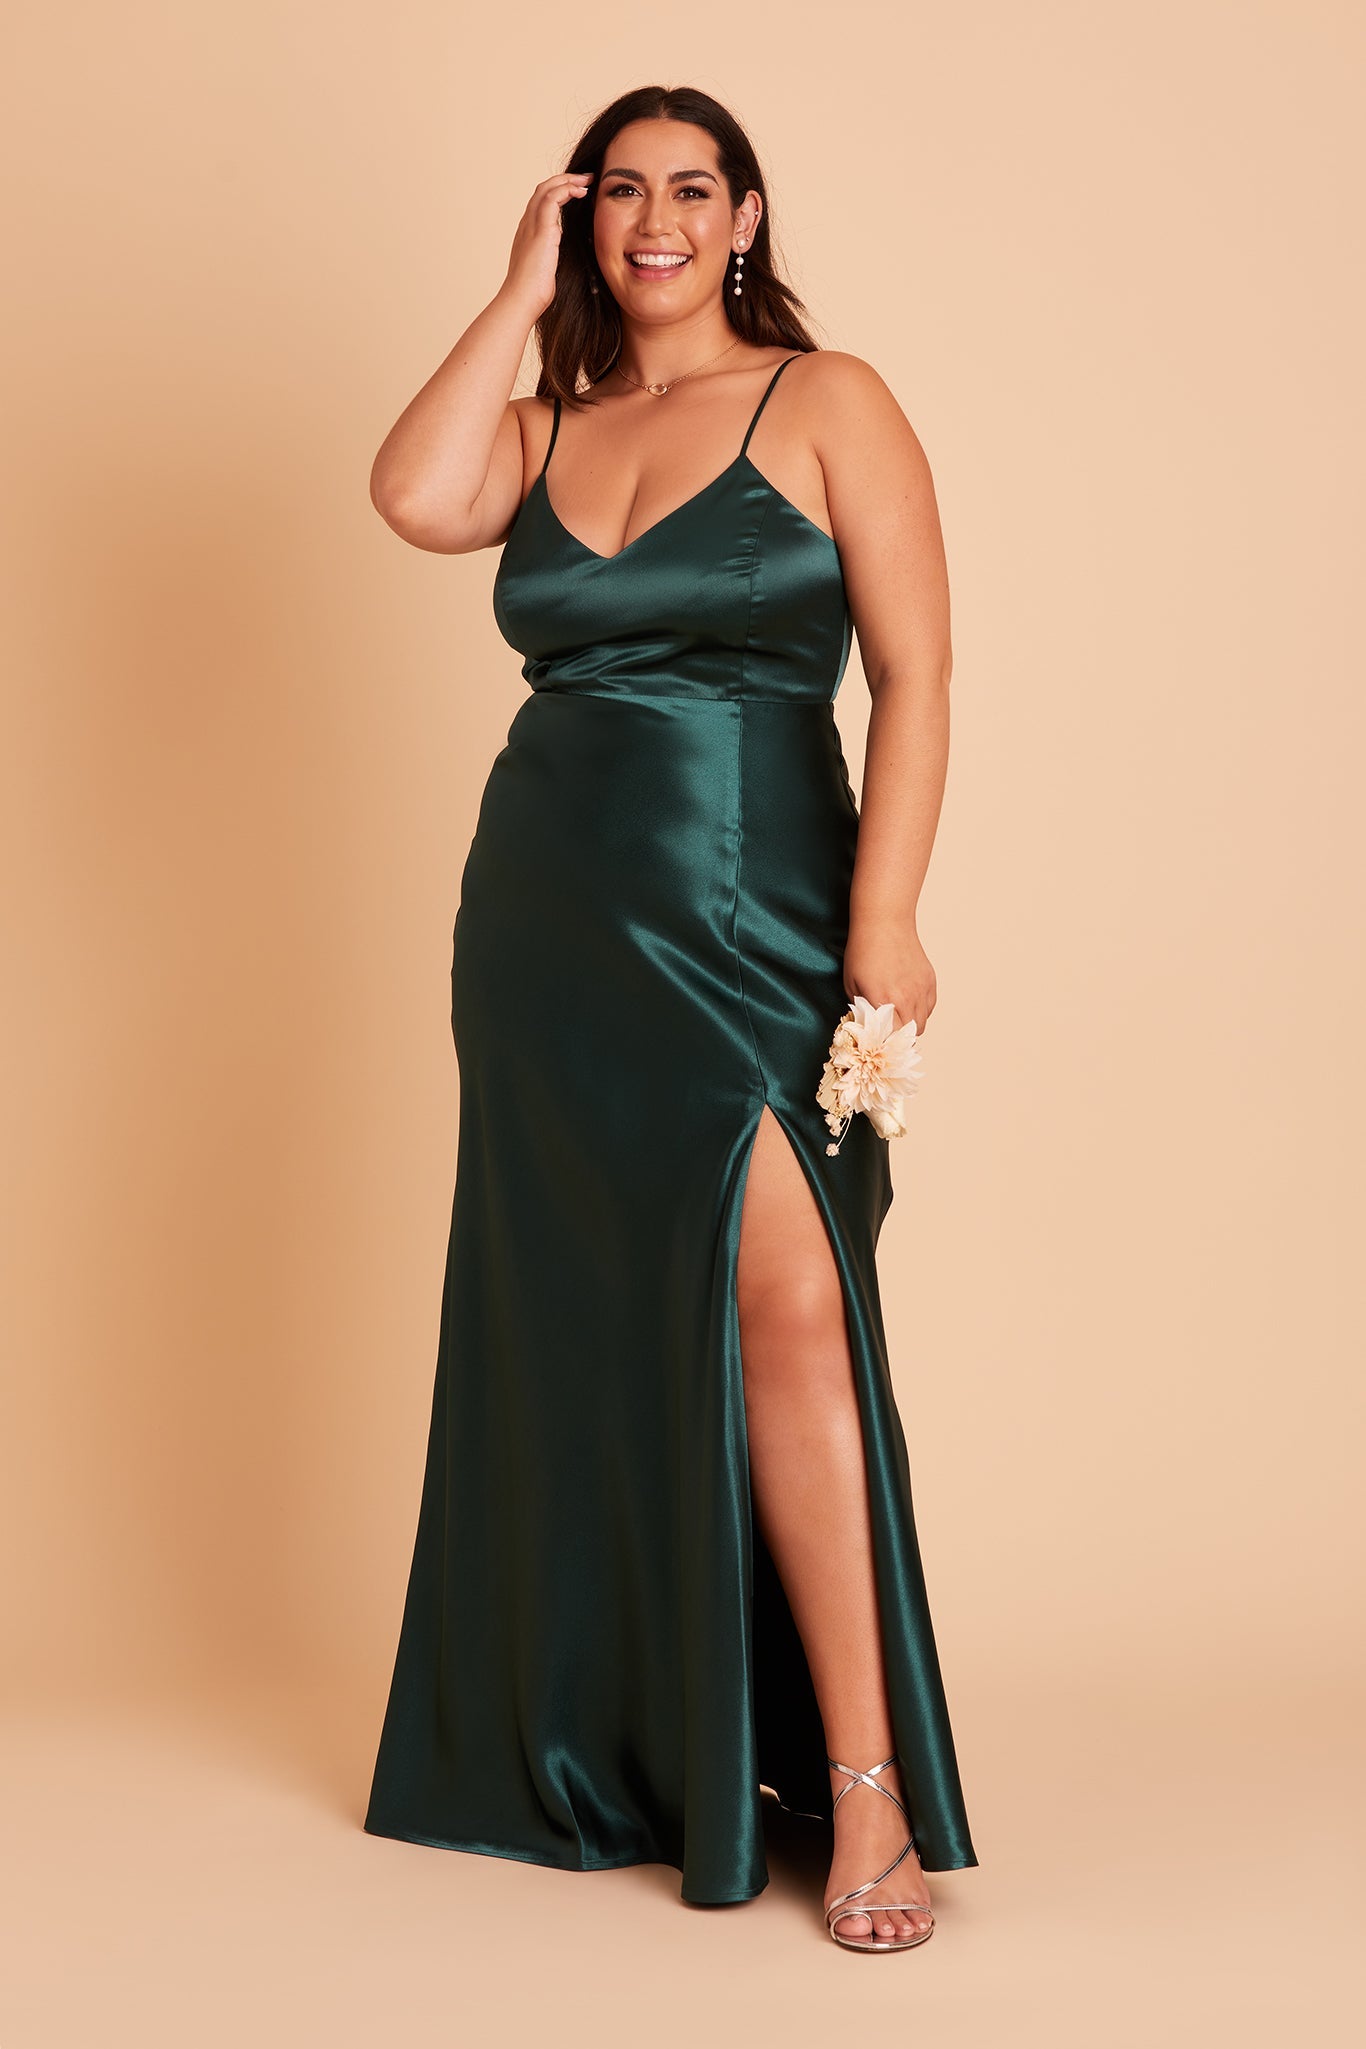 Jay plus size bridesmaid dress with slit in emerald satin by Birdy Grey, front view